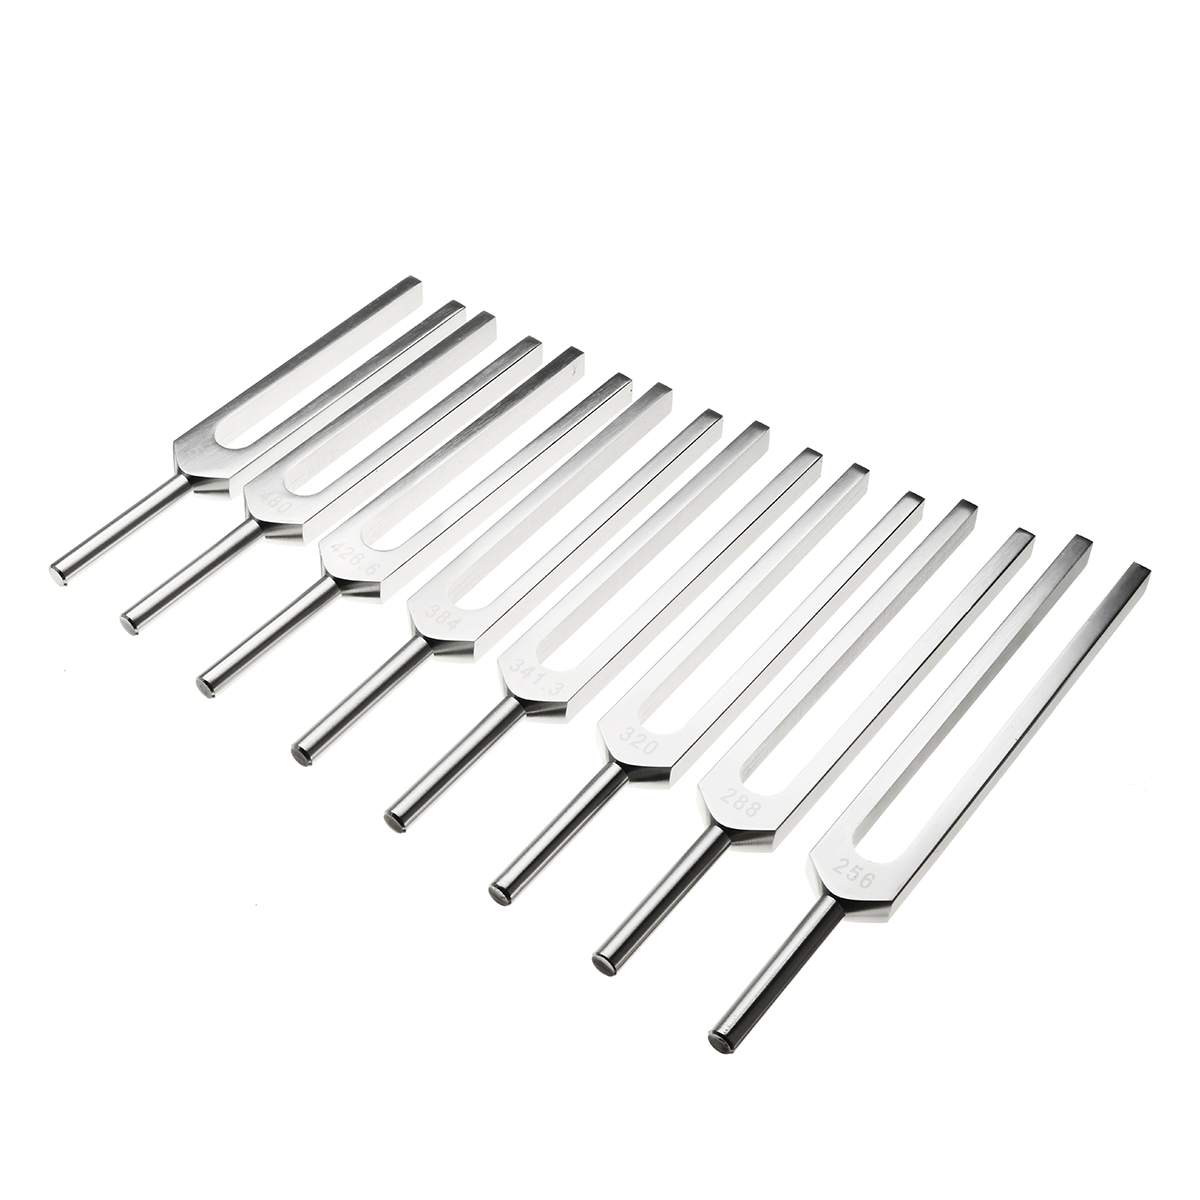 8Pcs-Aluminum-Medical-Tuning-Fork-For-Sound-Therapy-Mallet-Box-Music-Instrument-1349720-4